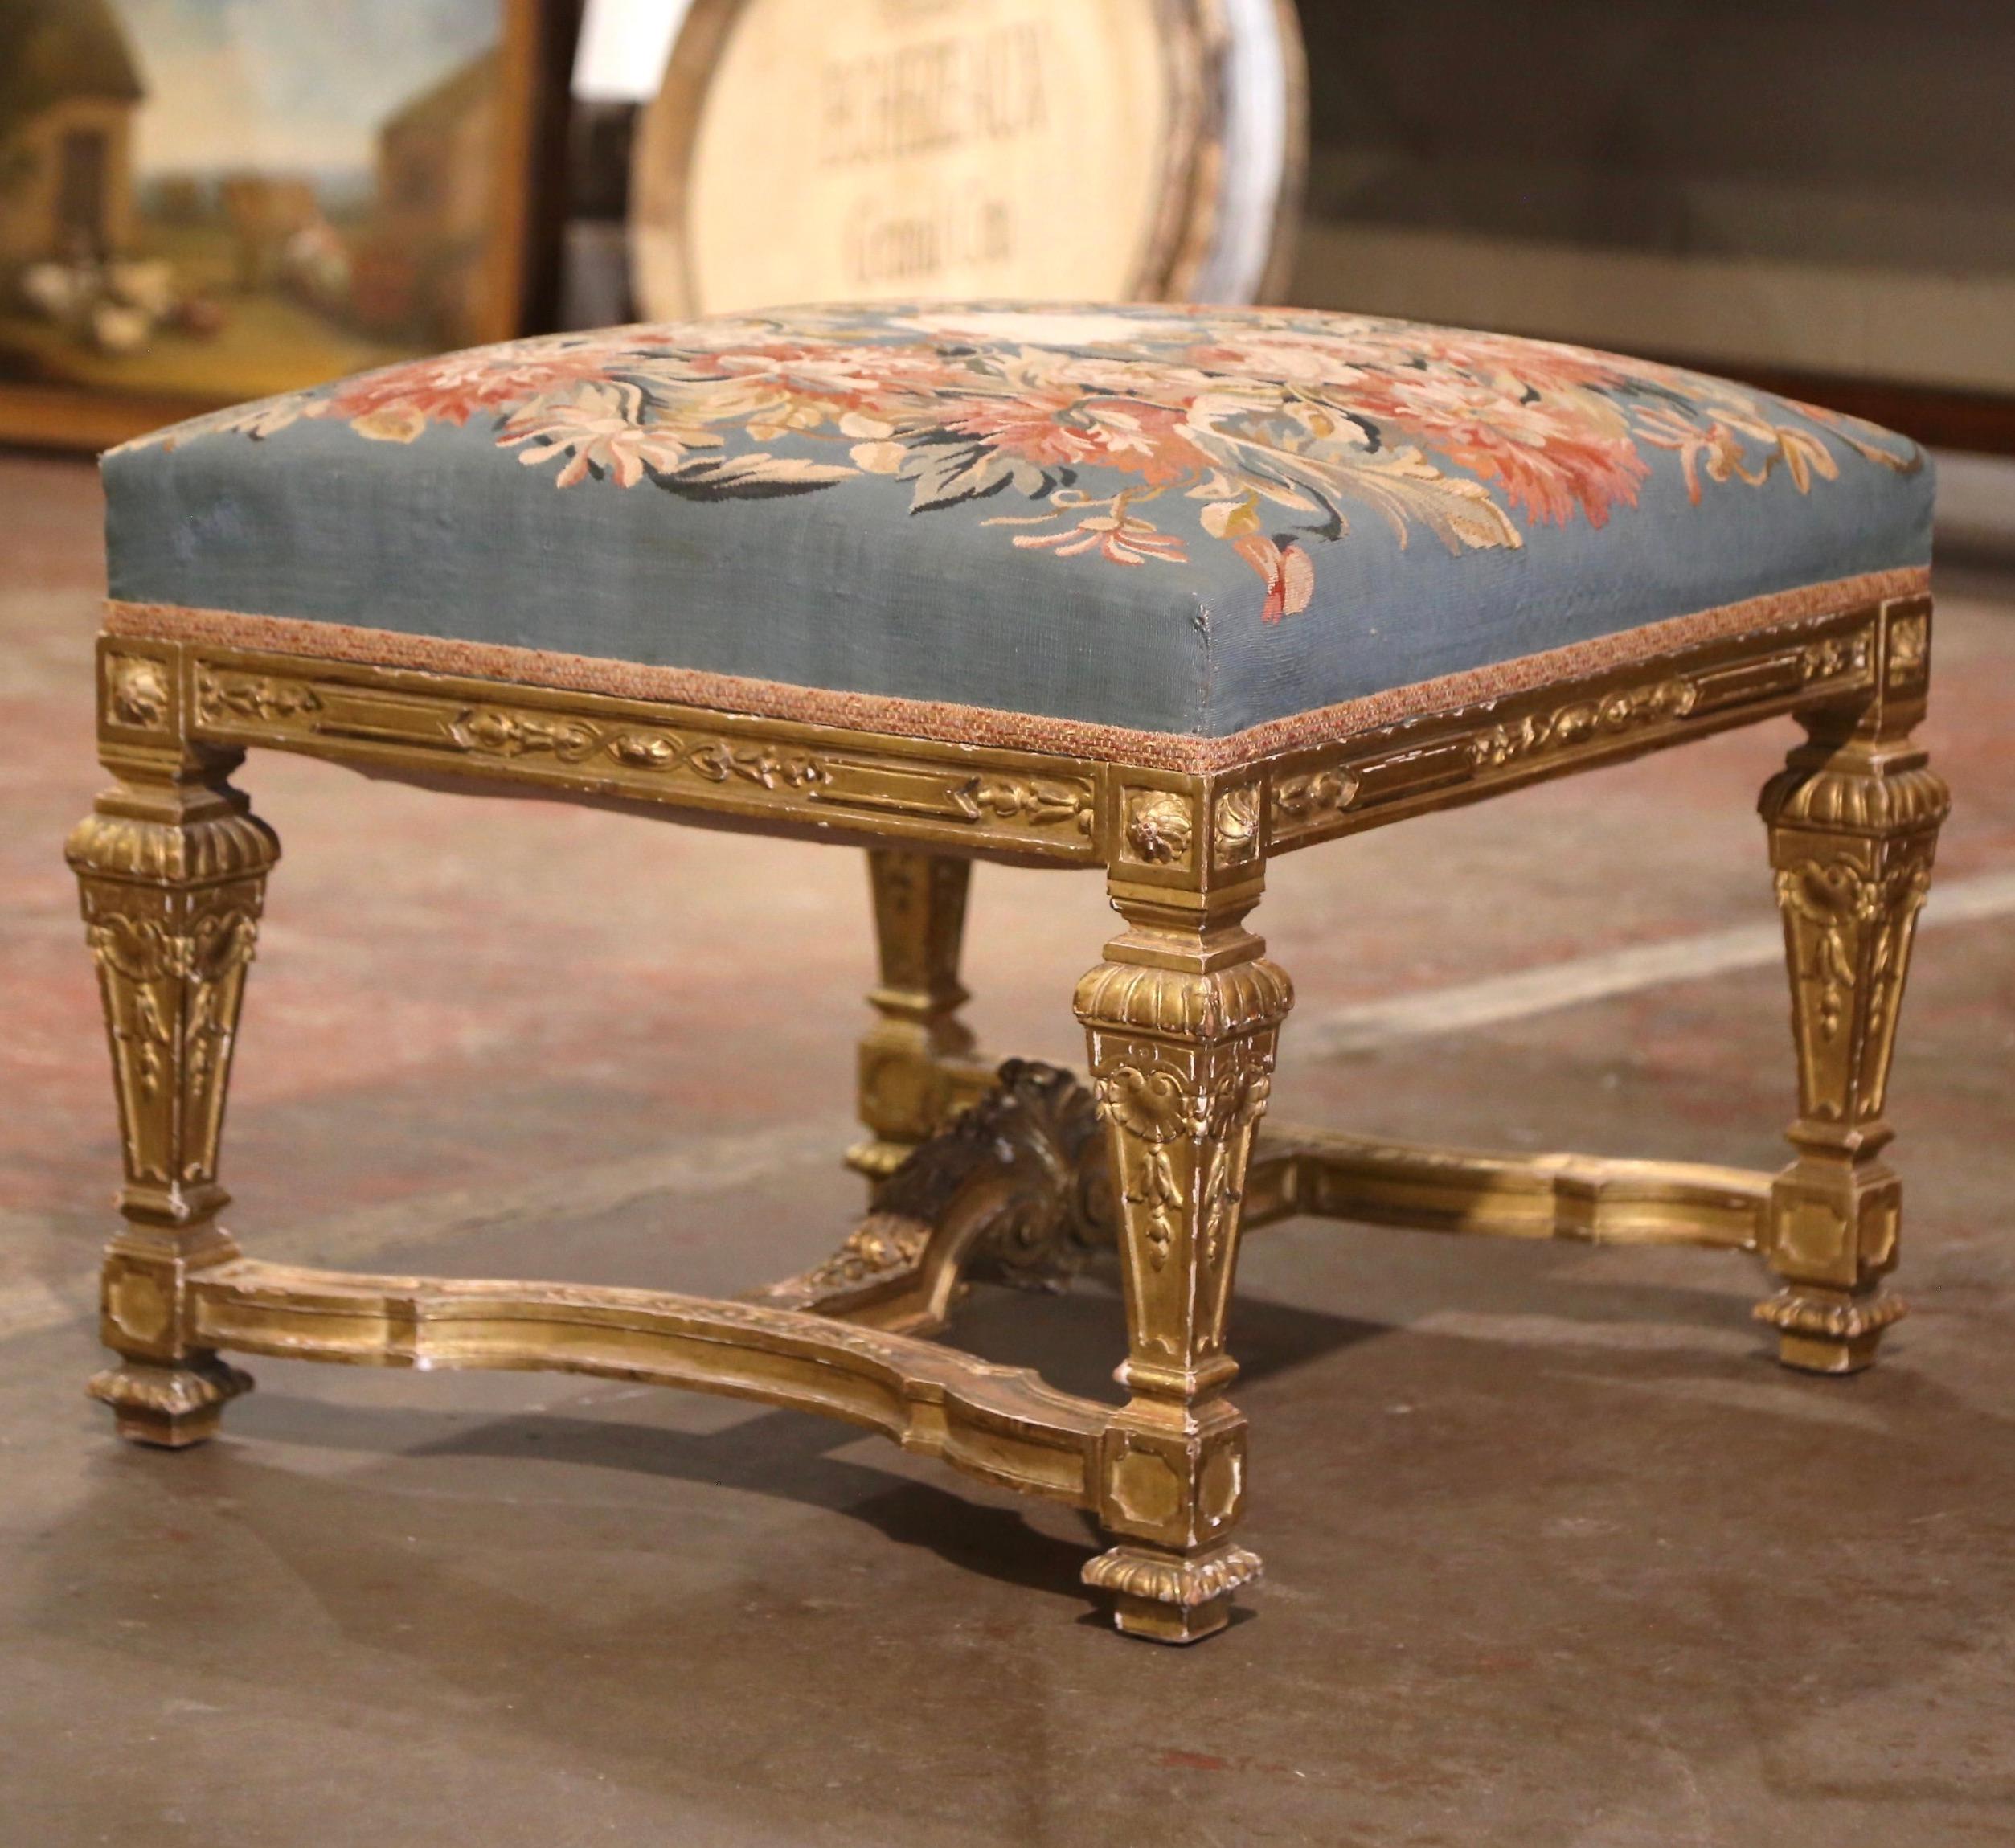 19th Century French Louis XIV Carved Giltwood Stool with Aubusson Tapestry For Sale 3